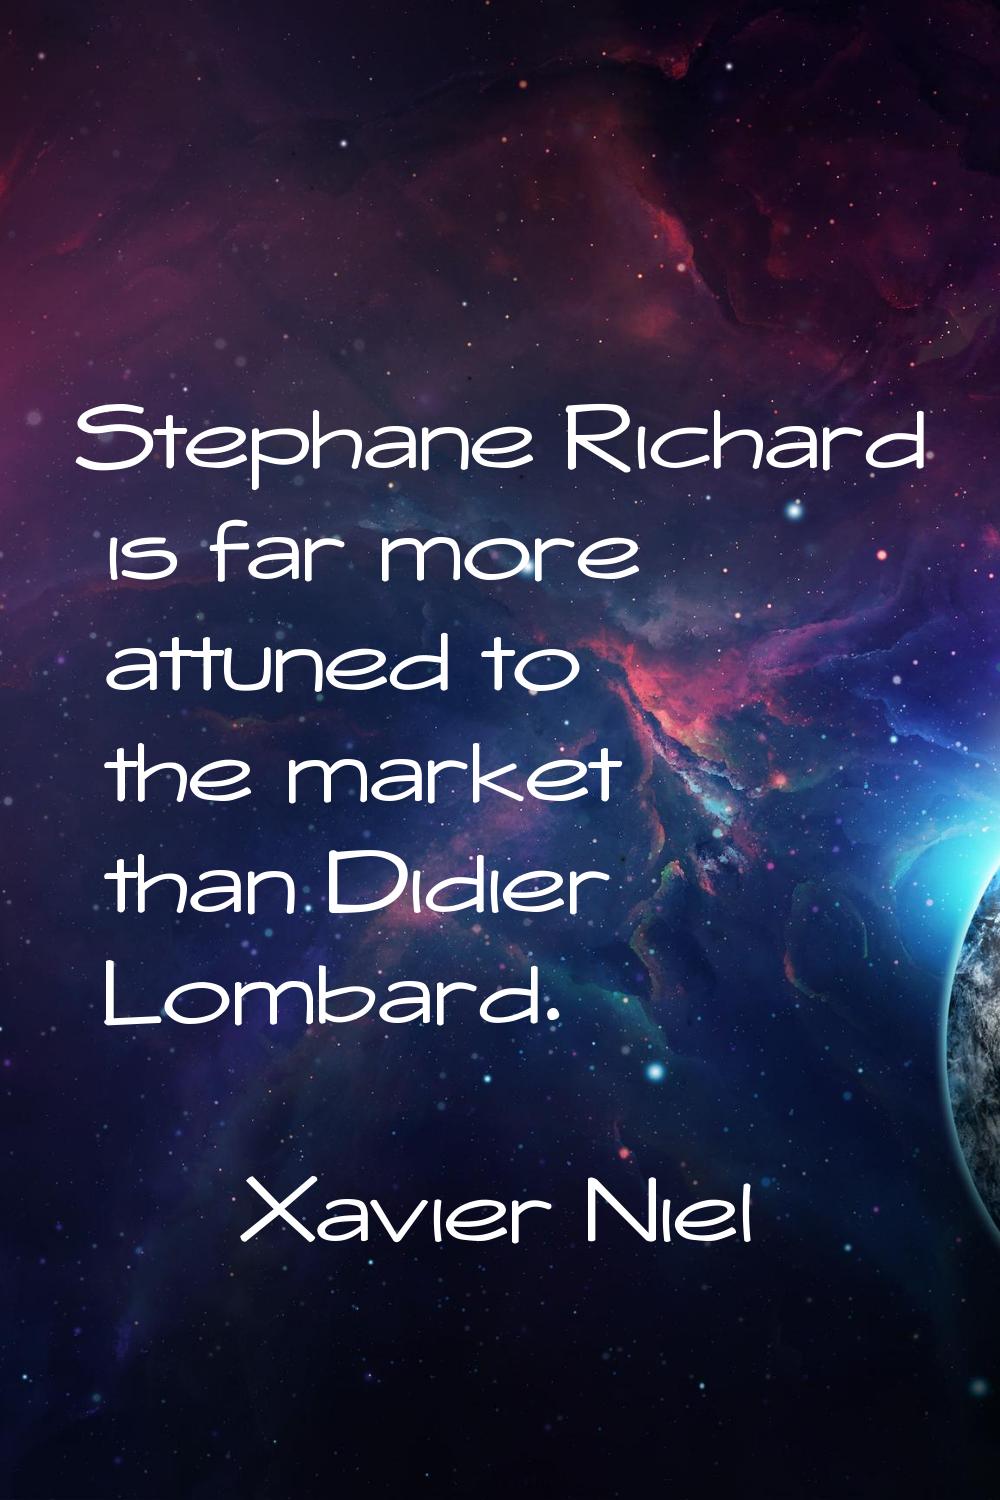 Stephane Richard is far more attuned to the market than Didier Lombard.